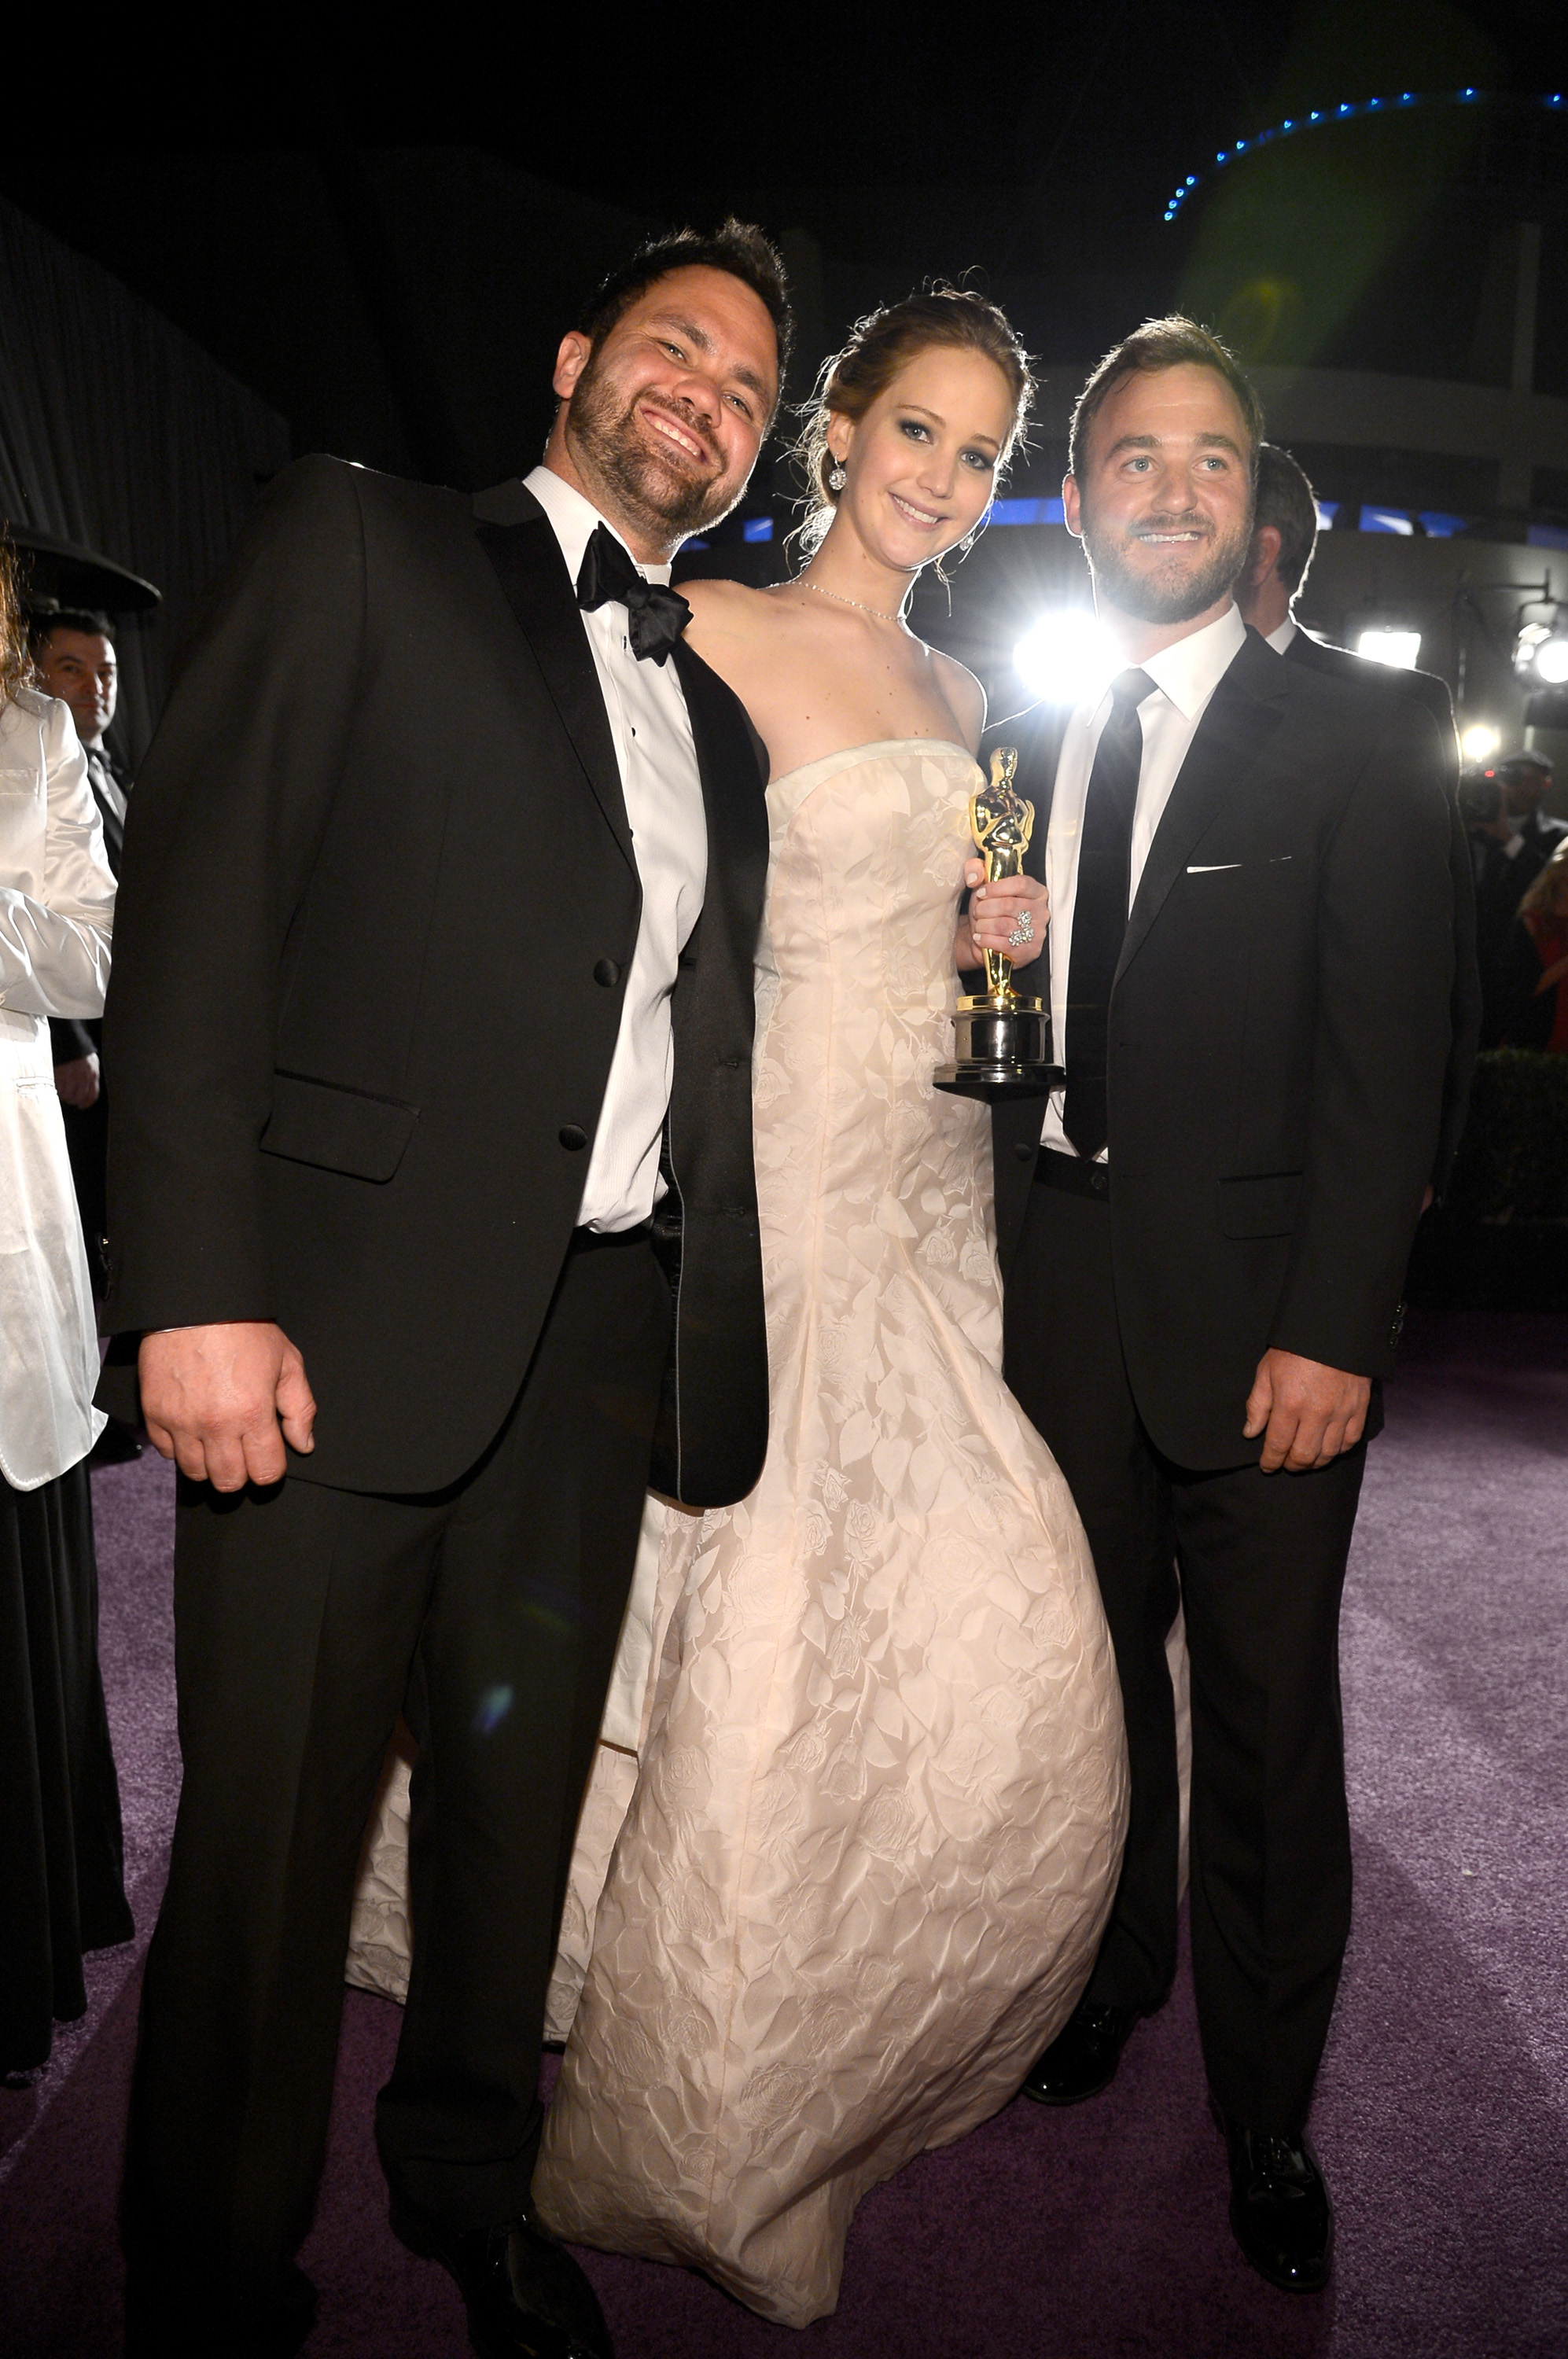 Jennifer Lawrence with her brothers, Ben and Blaine